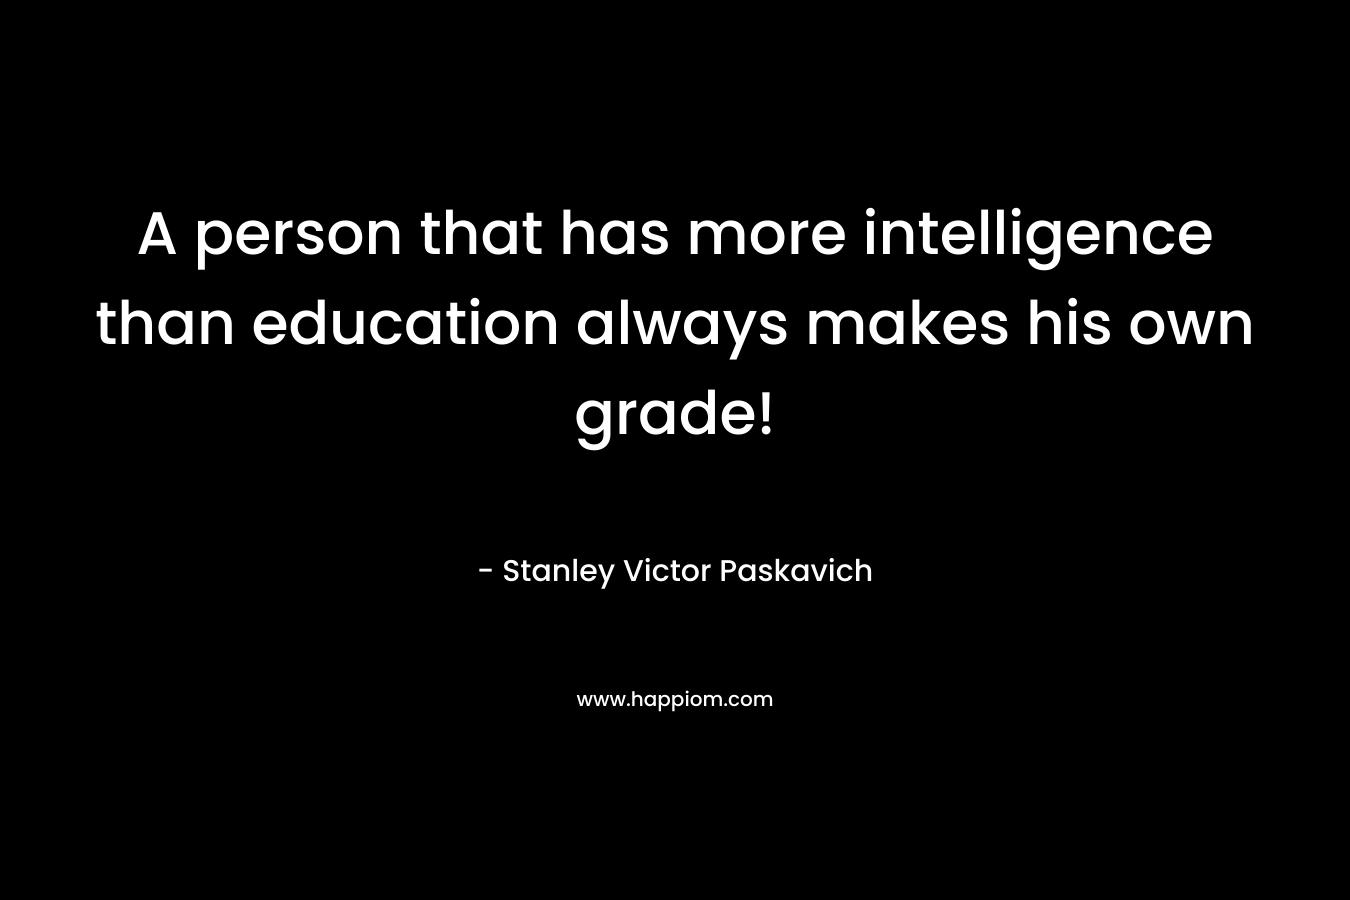 A person that has more intelligence than education always makes his own grade! – Stanley Victor Paskavich